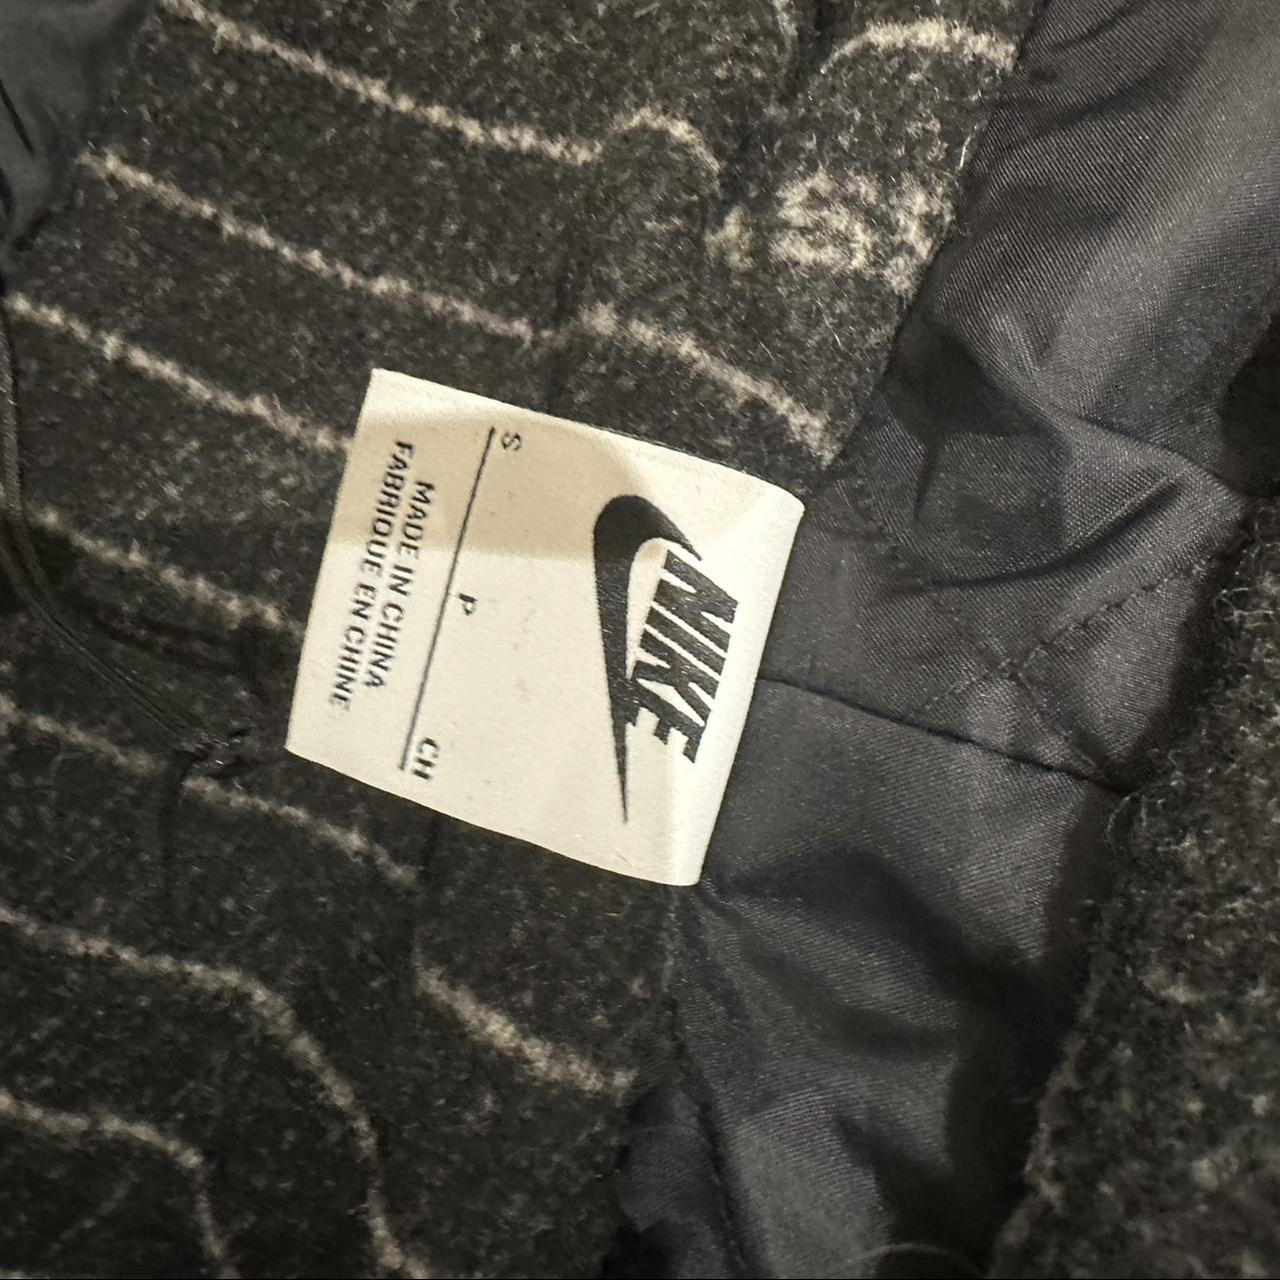 NOT GOING DOWN TO 200 Stussy X Nike Wool Jumper size... - Depop